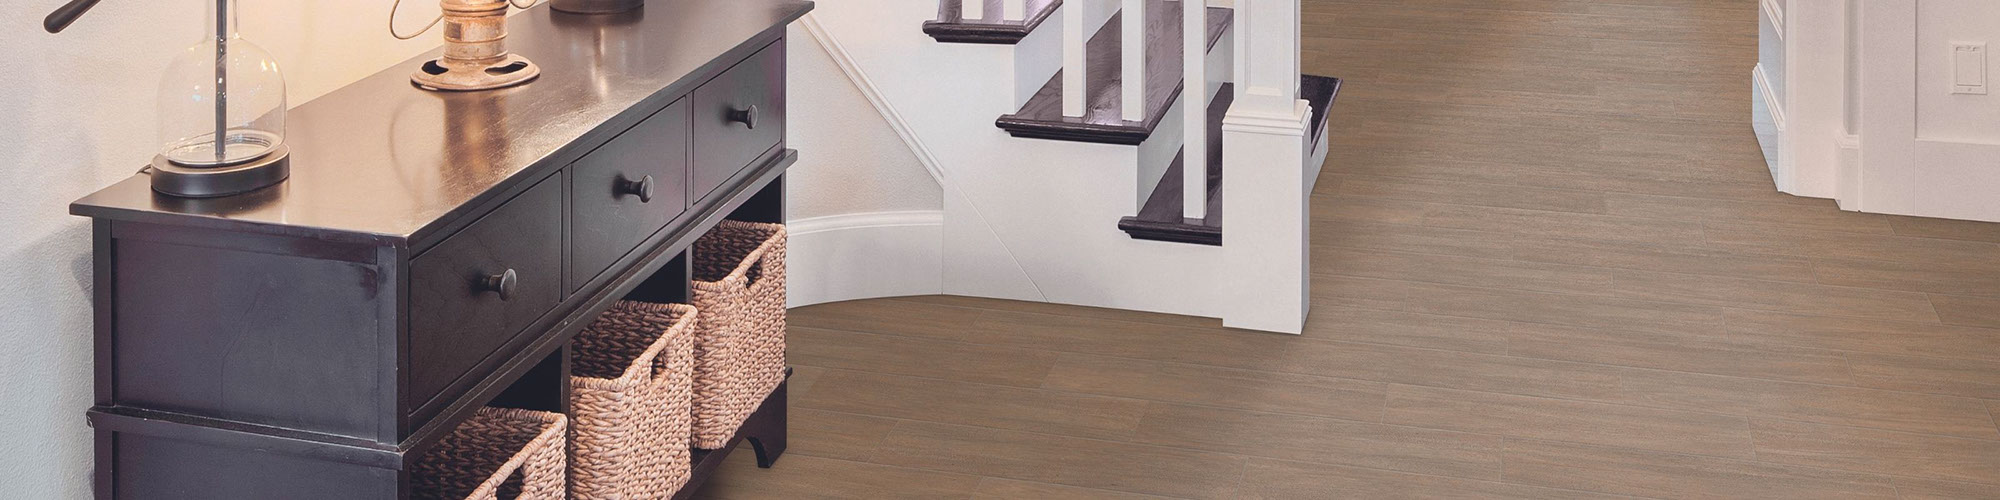 Residential foyer with floor tile that looks like wood flooring, dark wood entry table with wicker baskets, staircase with dark wood step & white railing.